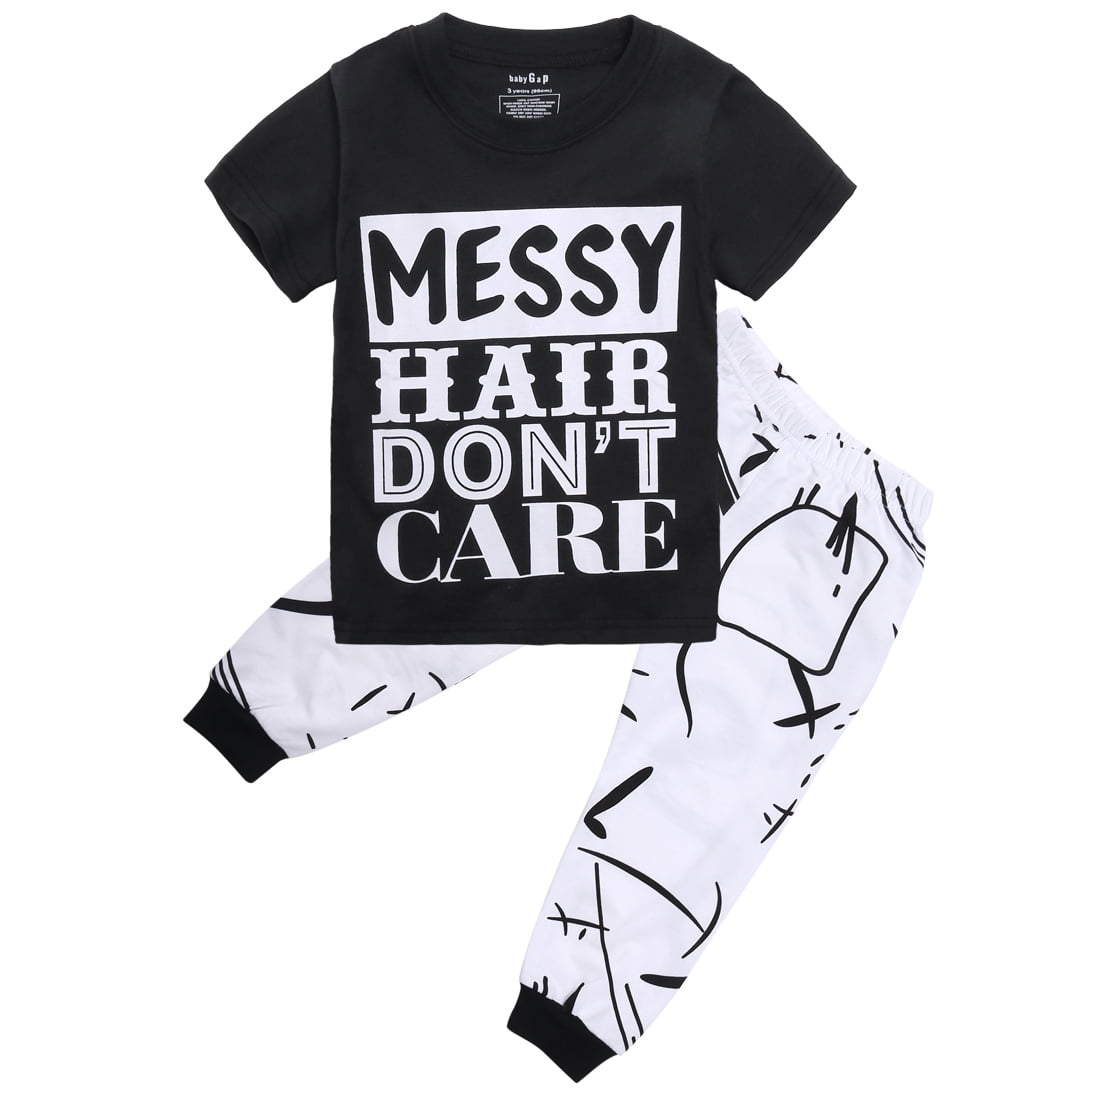 2pcs Toddler Baby Kids Boy Girl  Letter Print Tops+Pants Outfits Set Clothes 